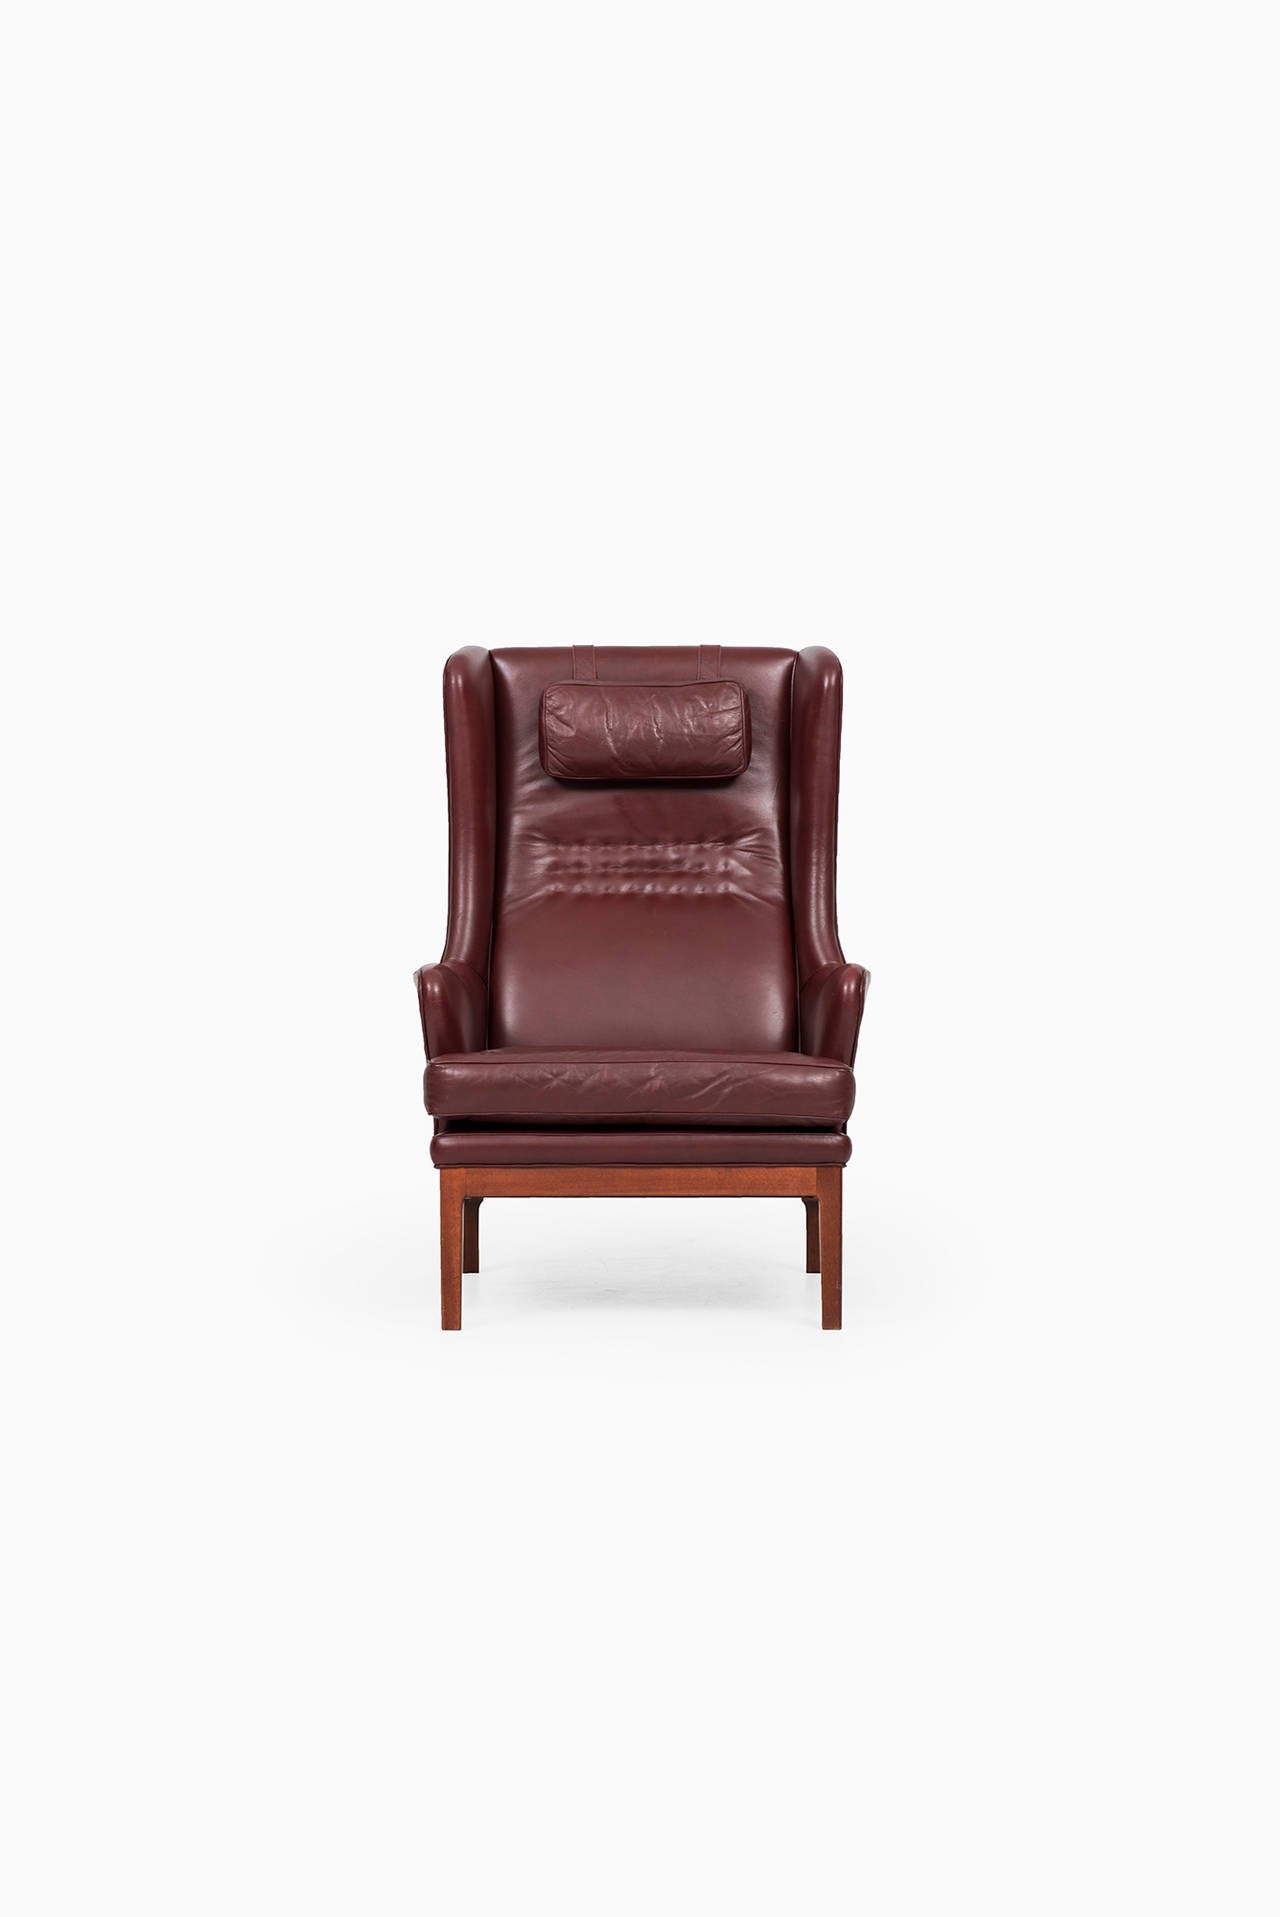 Rare wingback easy chair in dark stained beech and dark red leather designed by Arne Norell. Produced by Norell AB in Sweden.